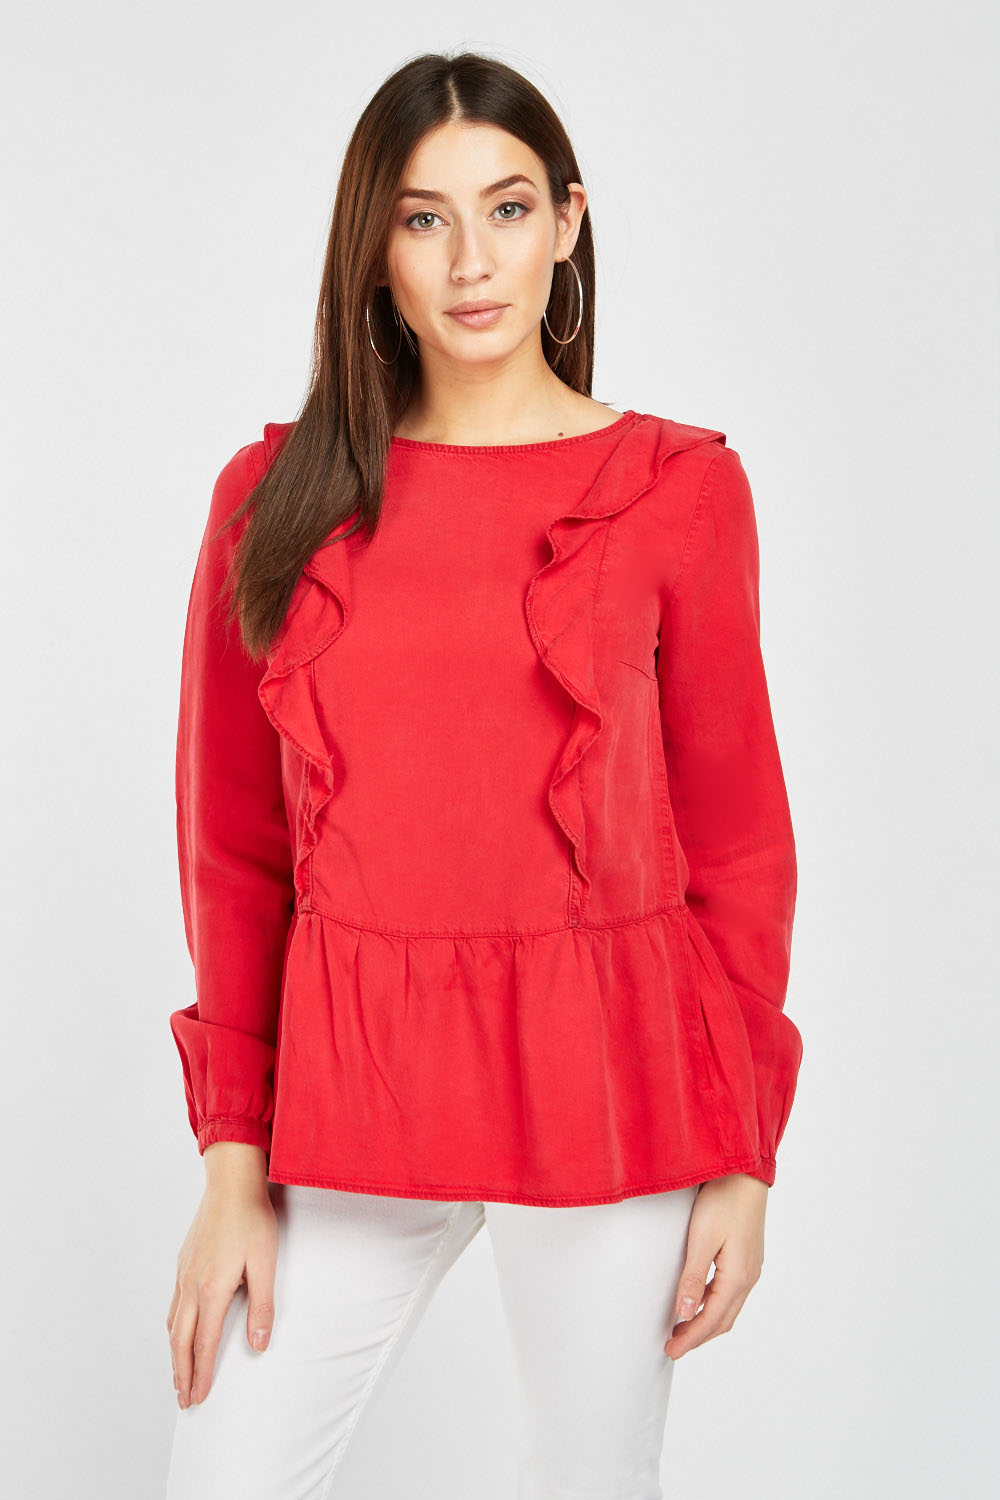 Ruffle Front Red Blouse - Just $2